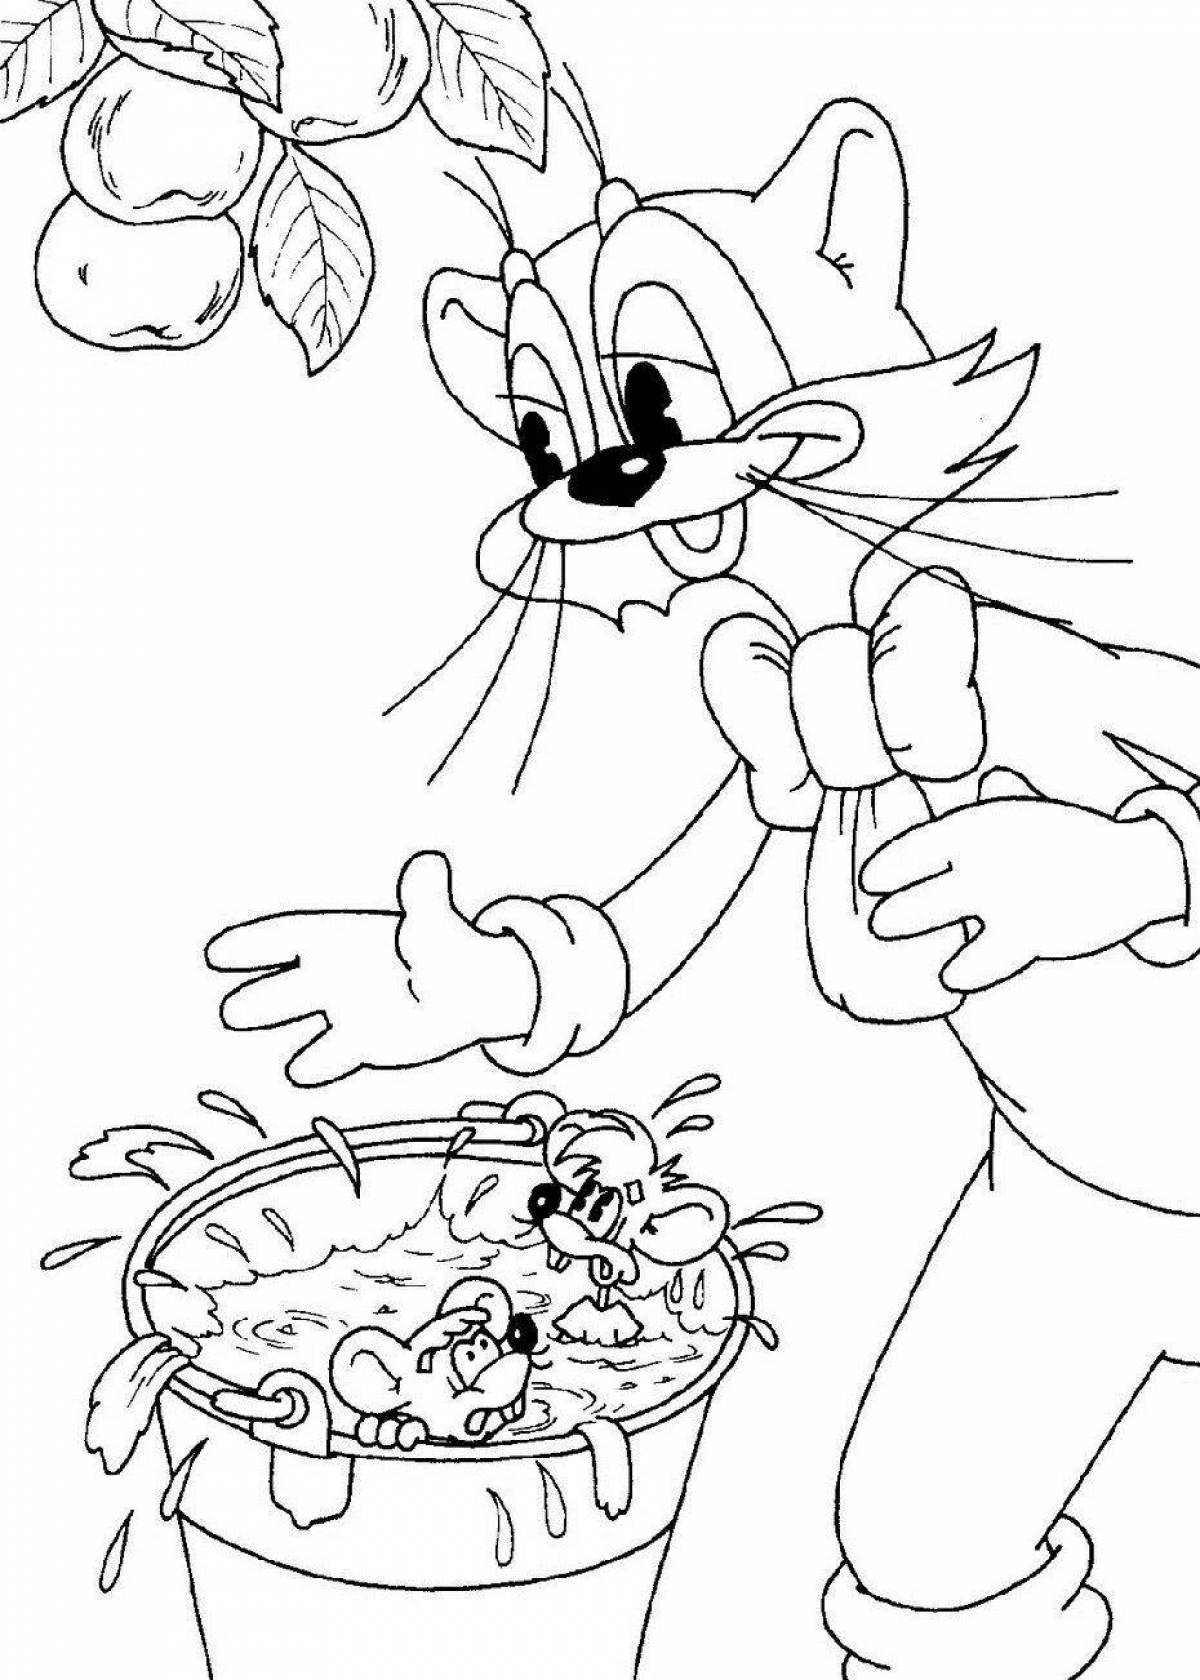 Coloring page amazing cat leopold